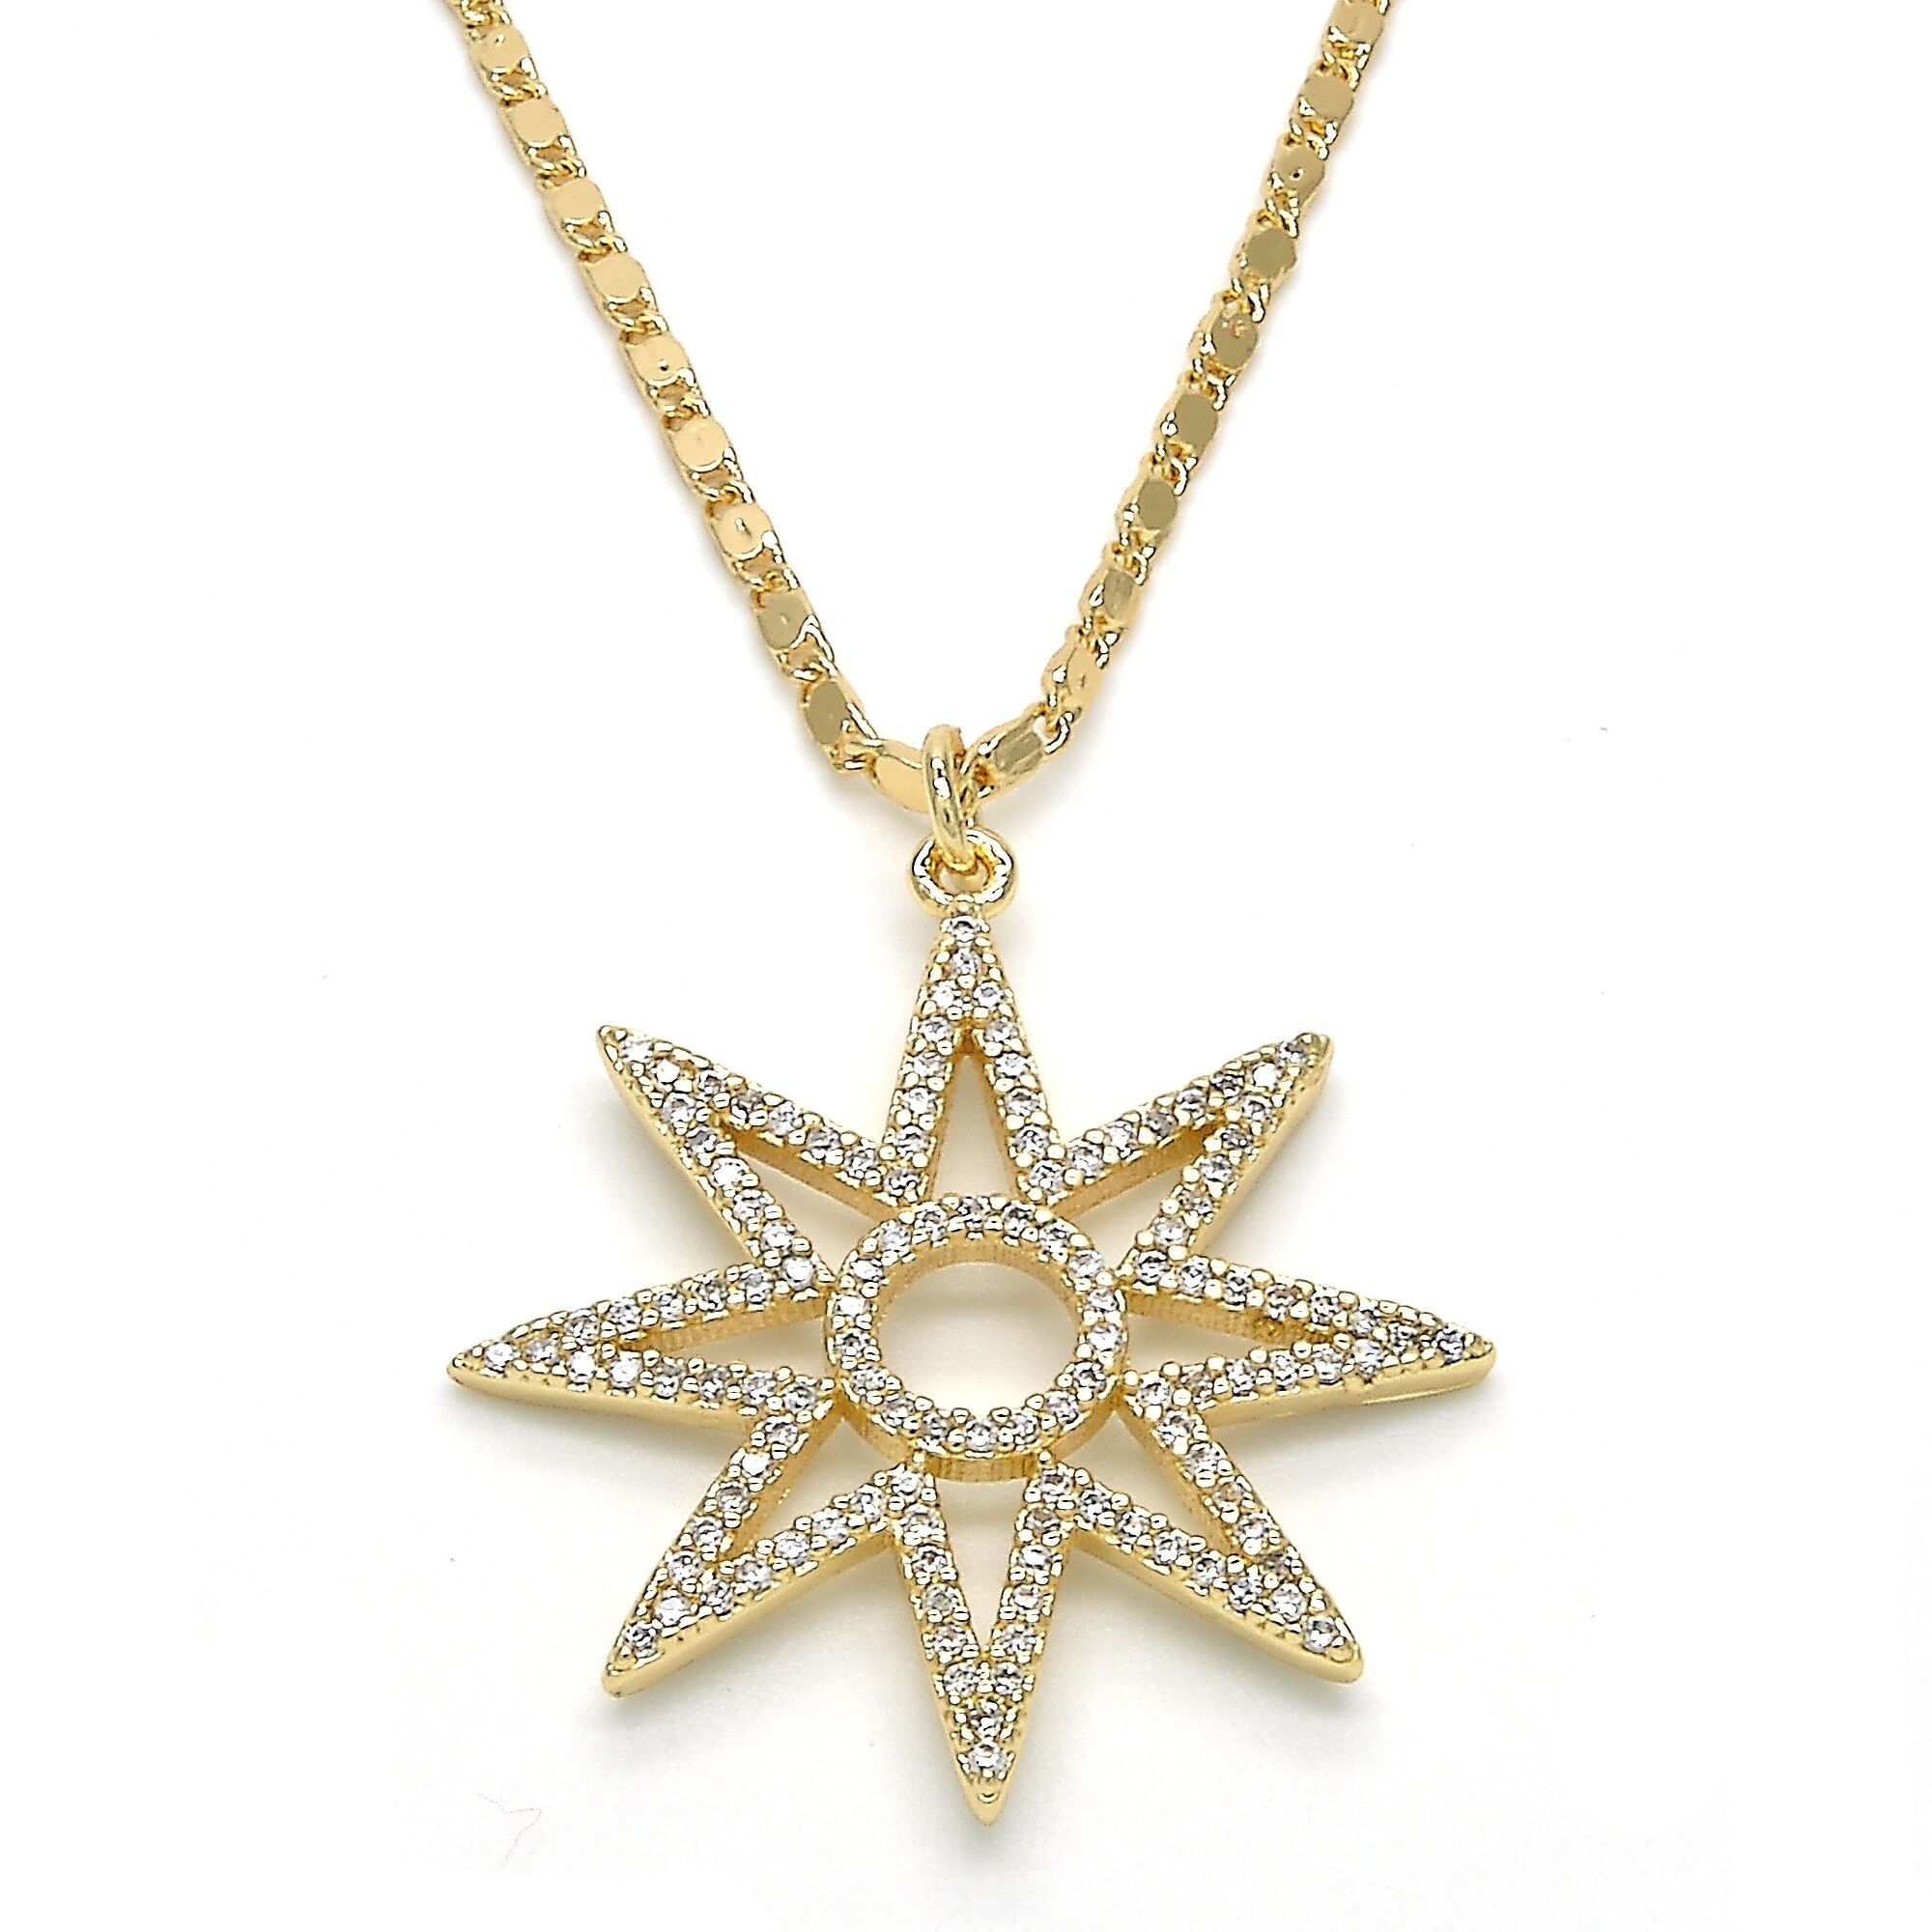 18k Gold Filled High Polish Finsh Elegant Star Shape Necklace With Diamond Accent